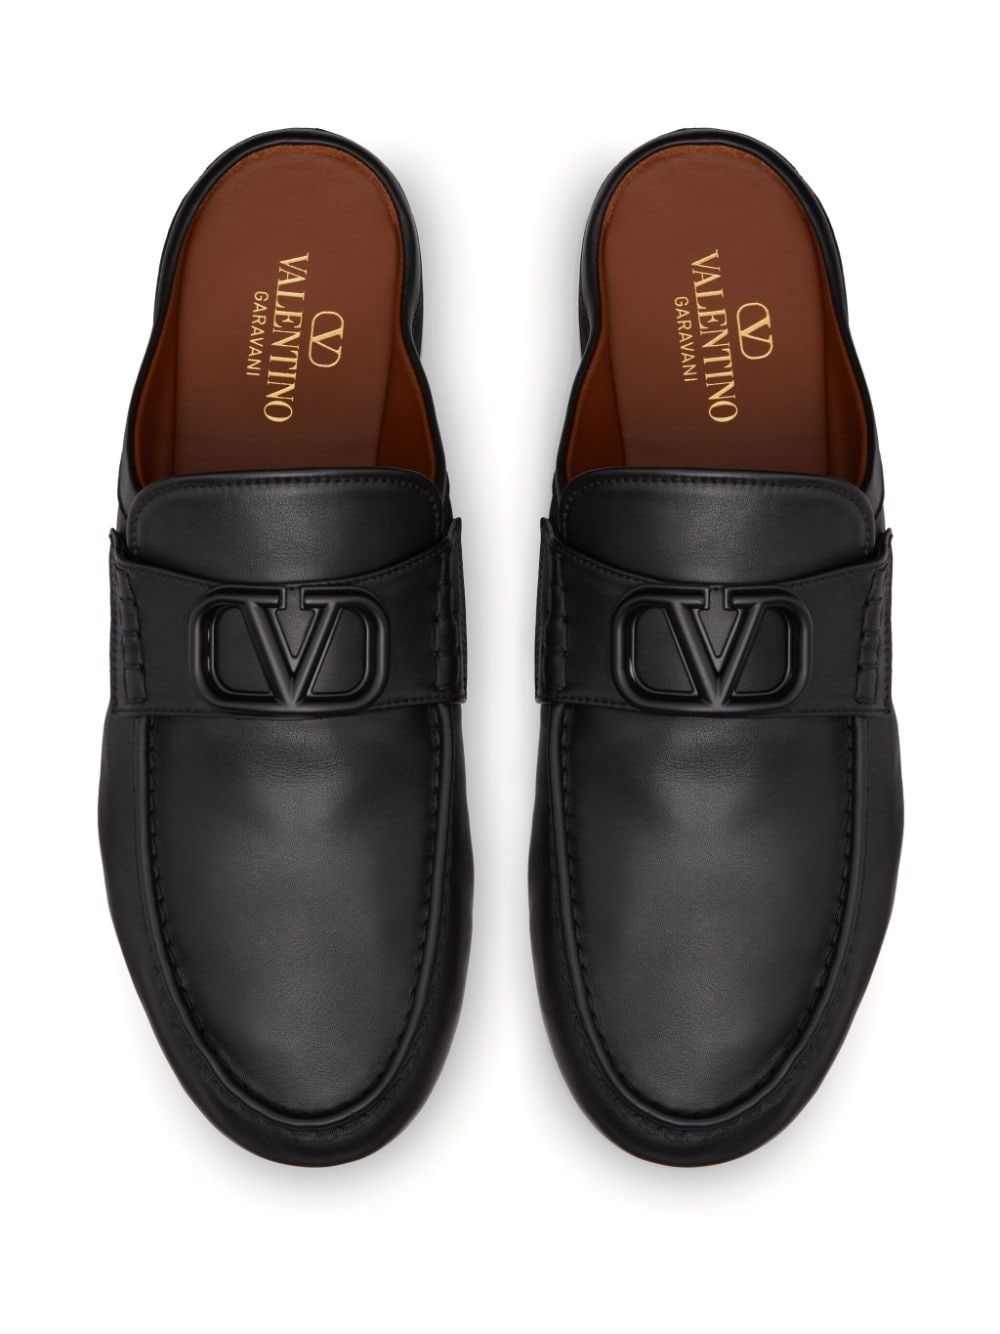 VLogo leather slippers - 4